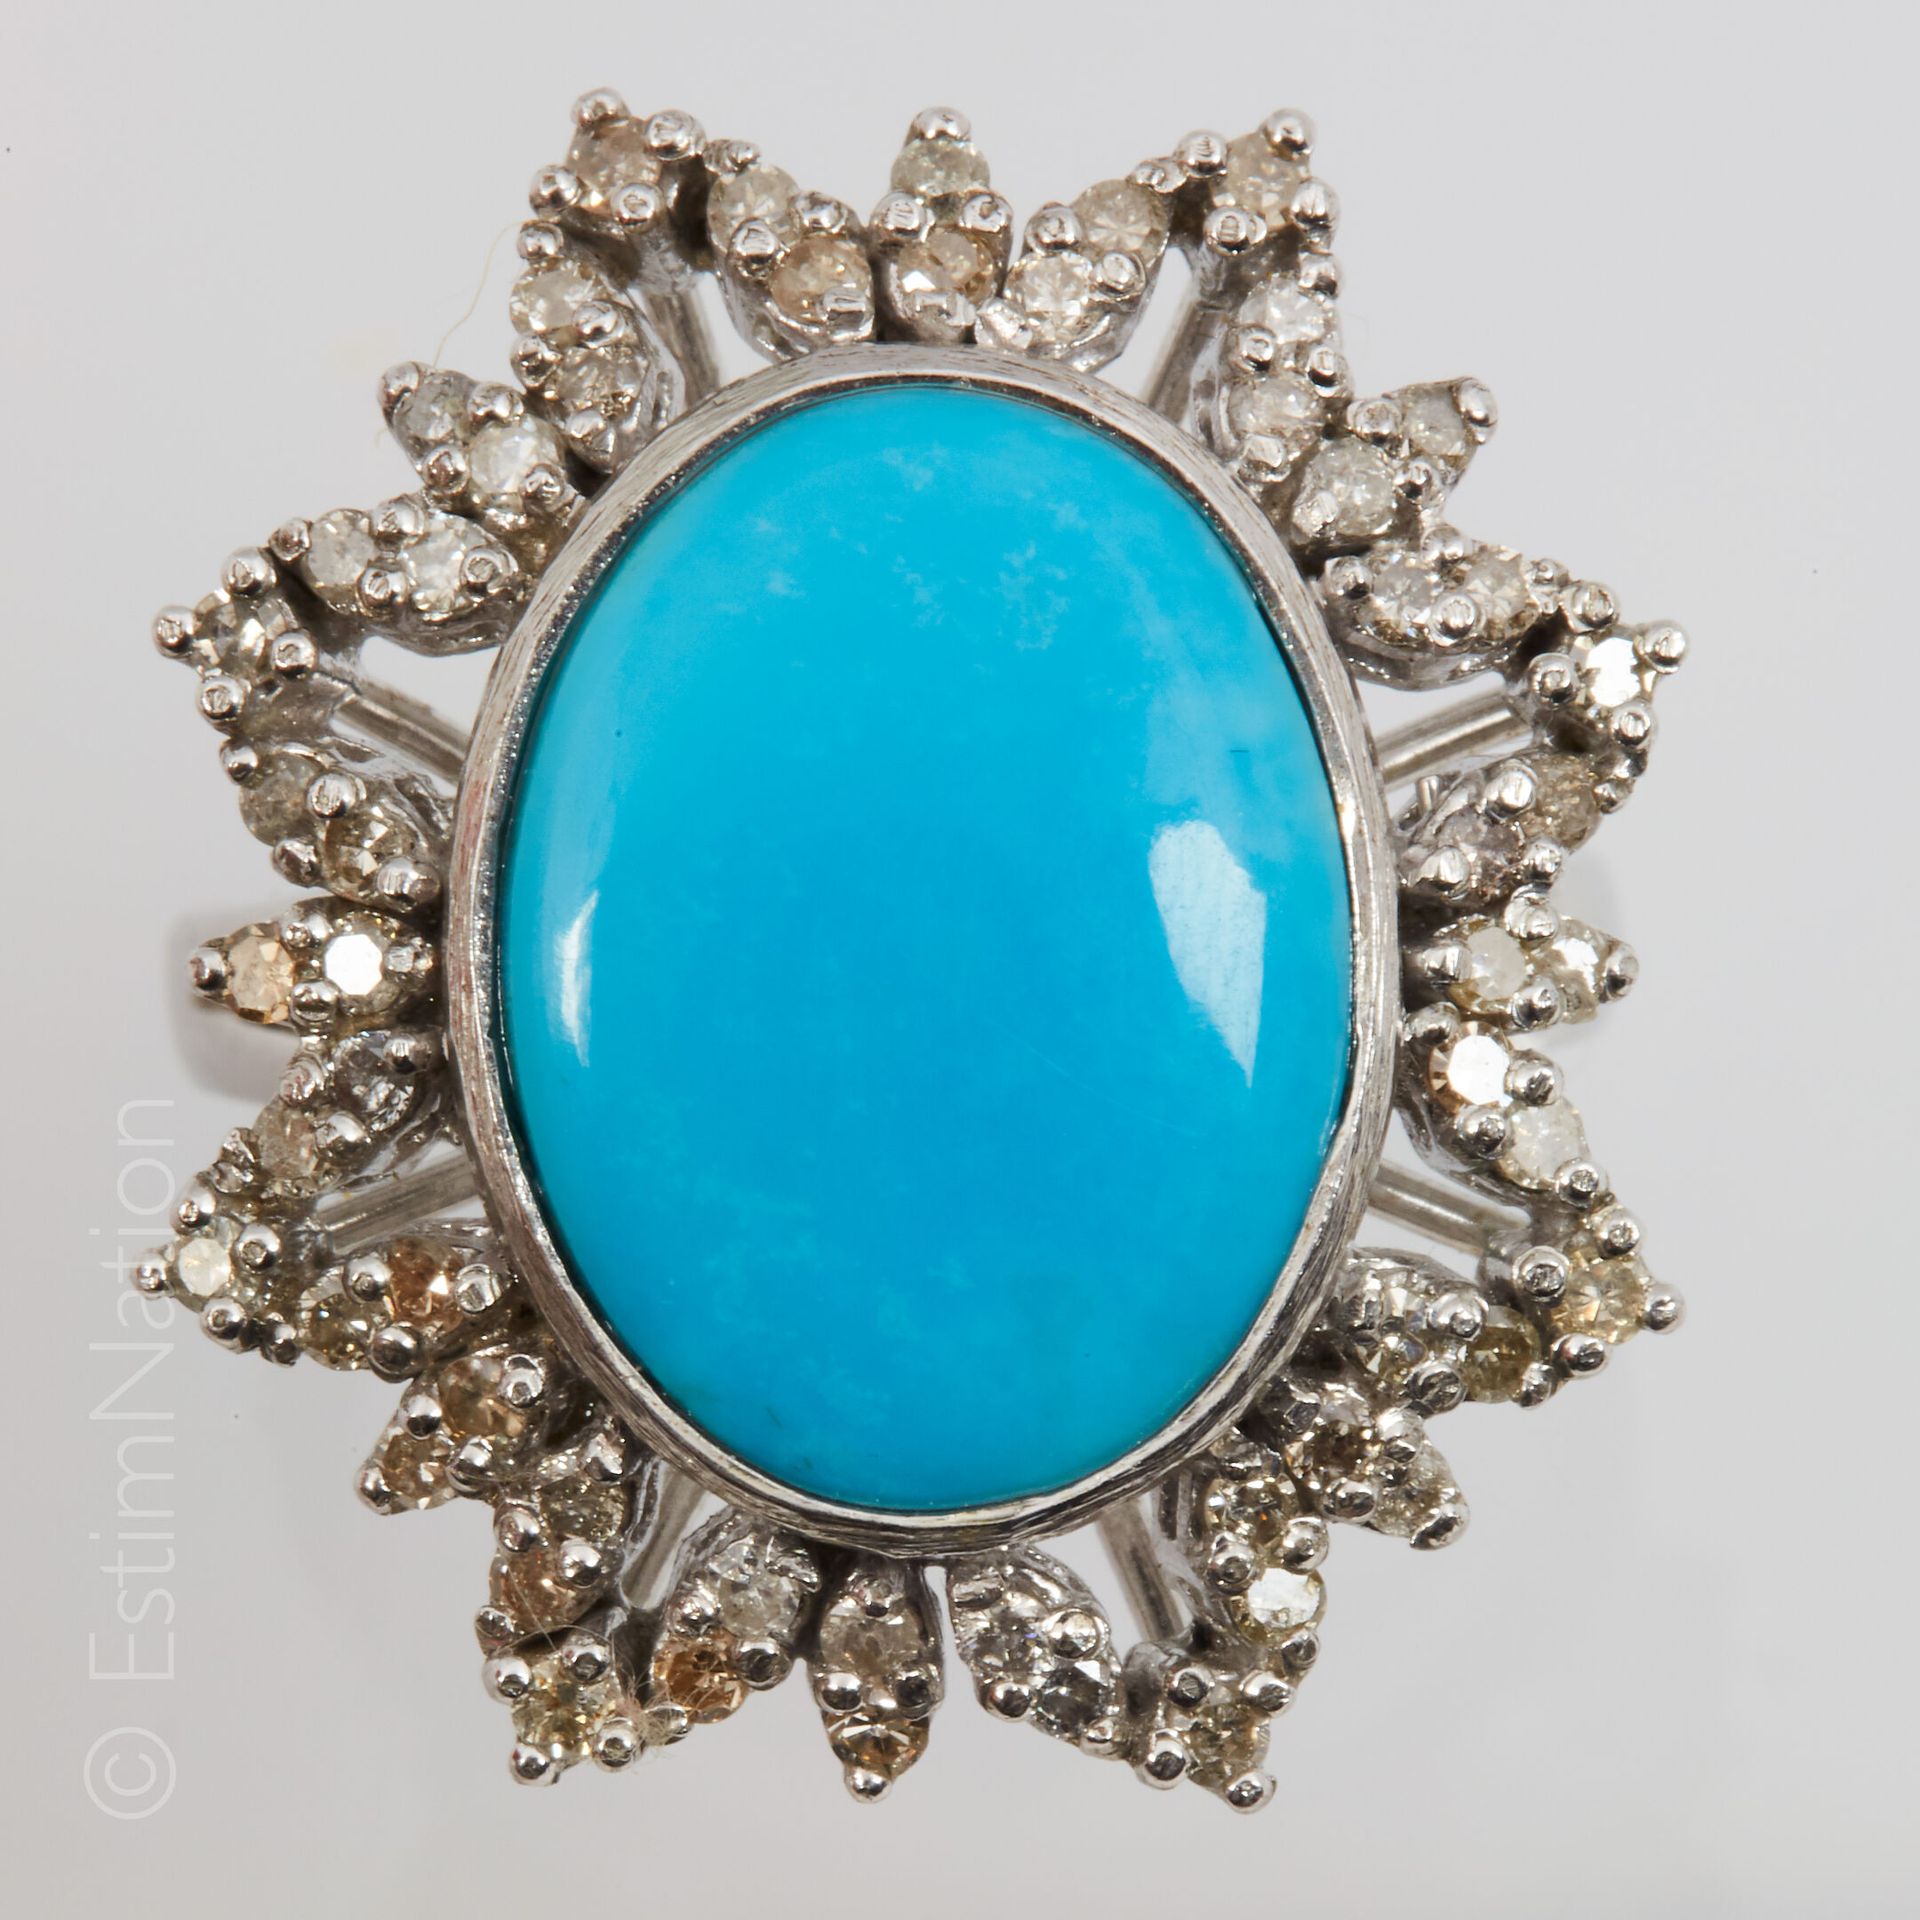 BAGUE TURQUOISE ET DIAMANTS Silver ring (925 thousandths) decorated with a caboc&hellip;